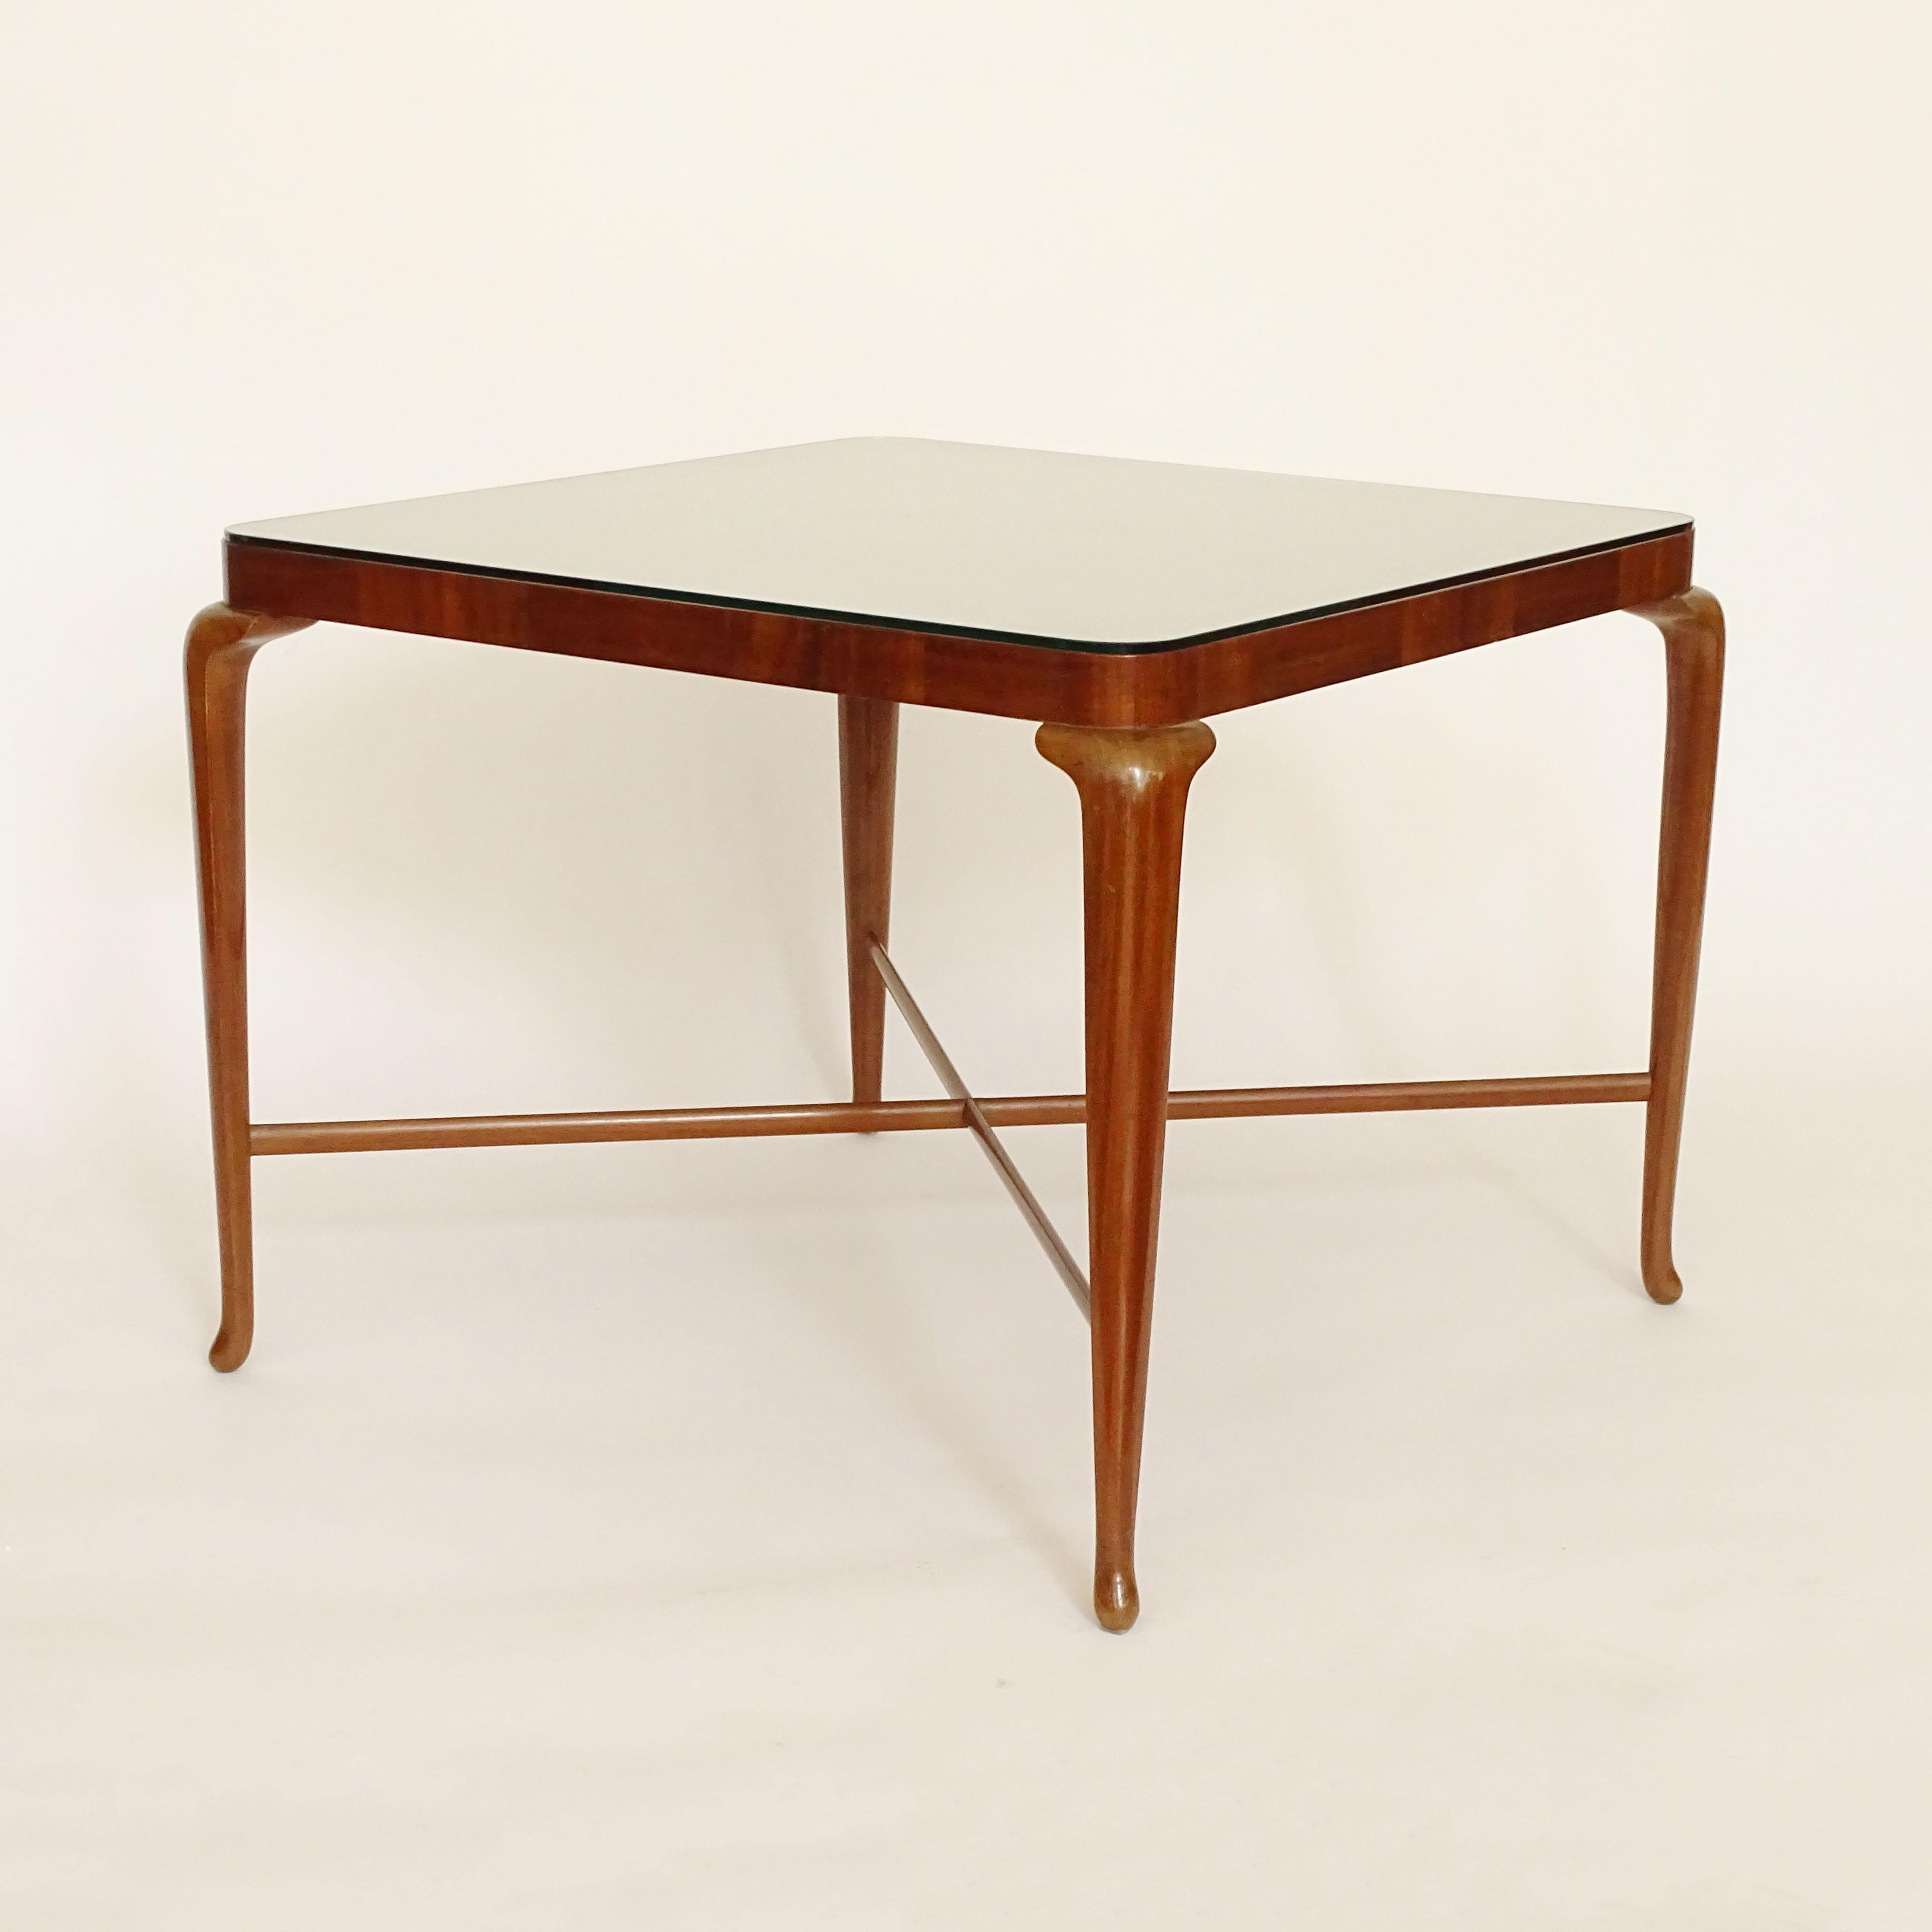 Paolo Buffa Wooden Coffee Table with Squares Top, Italy, 1940s For Sale 4